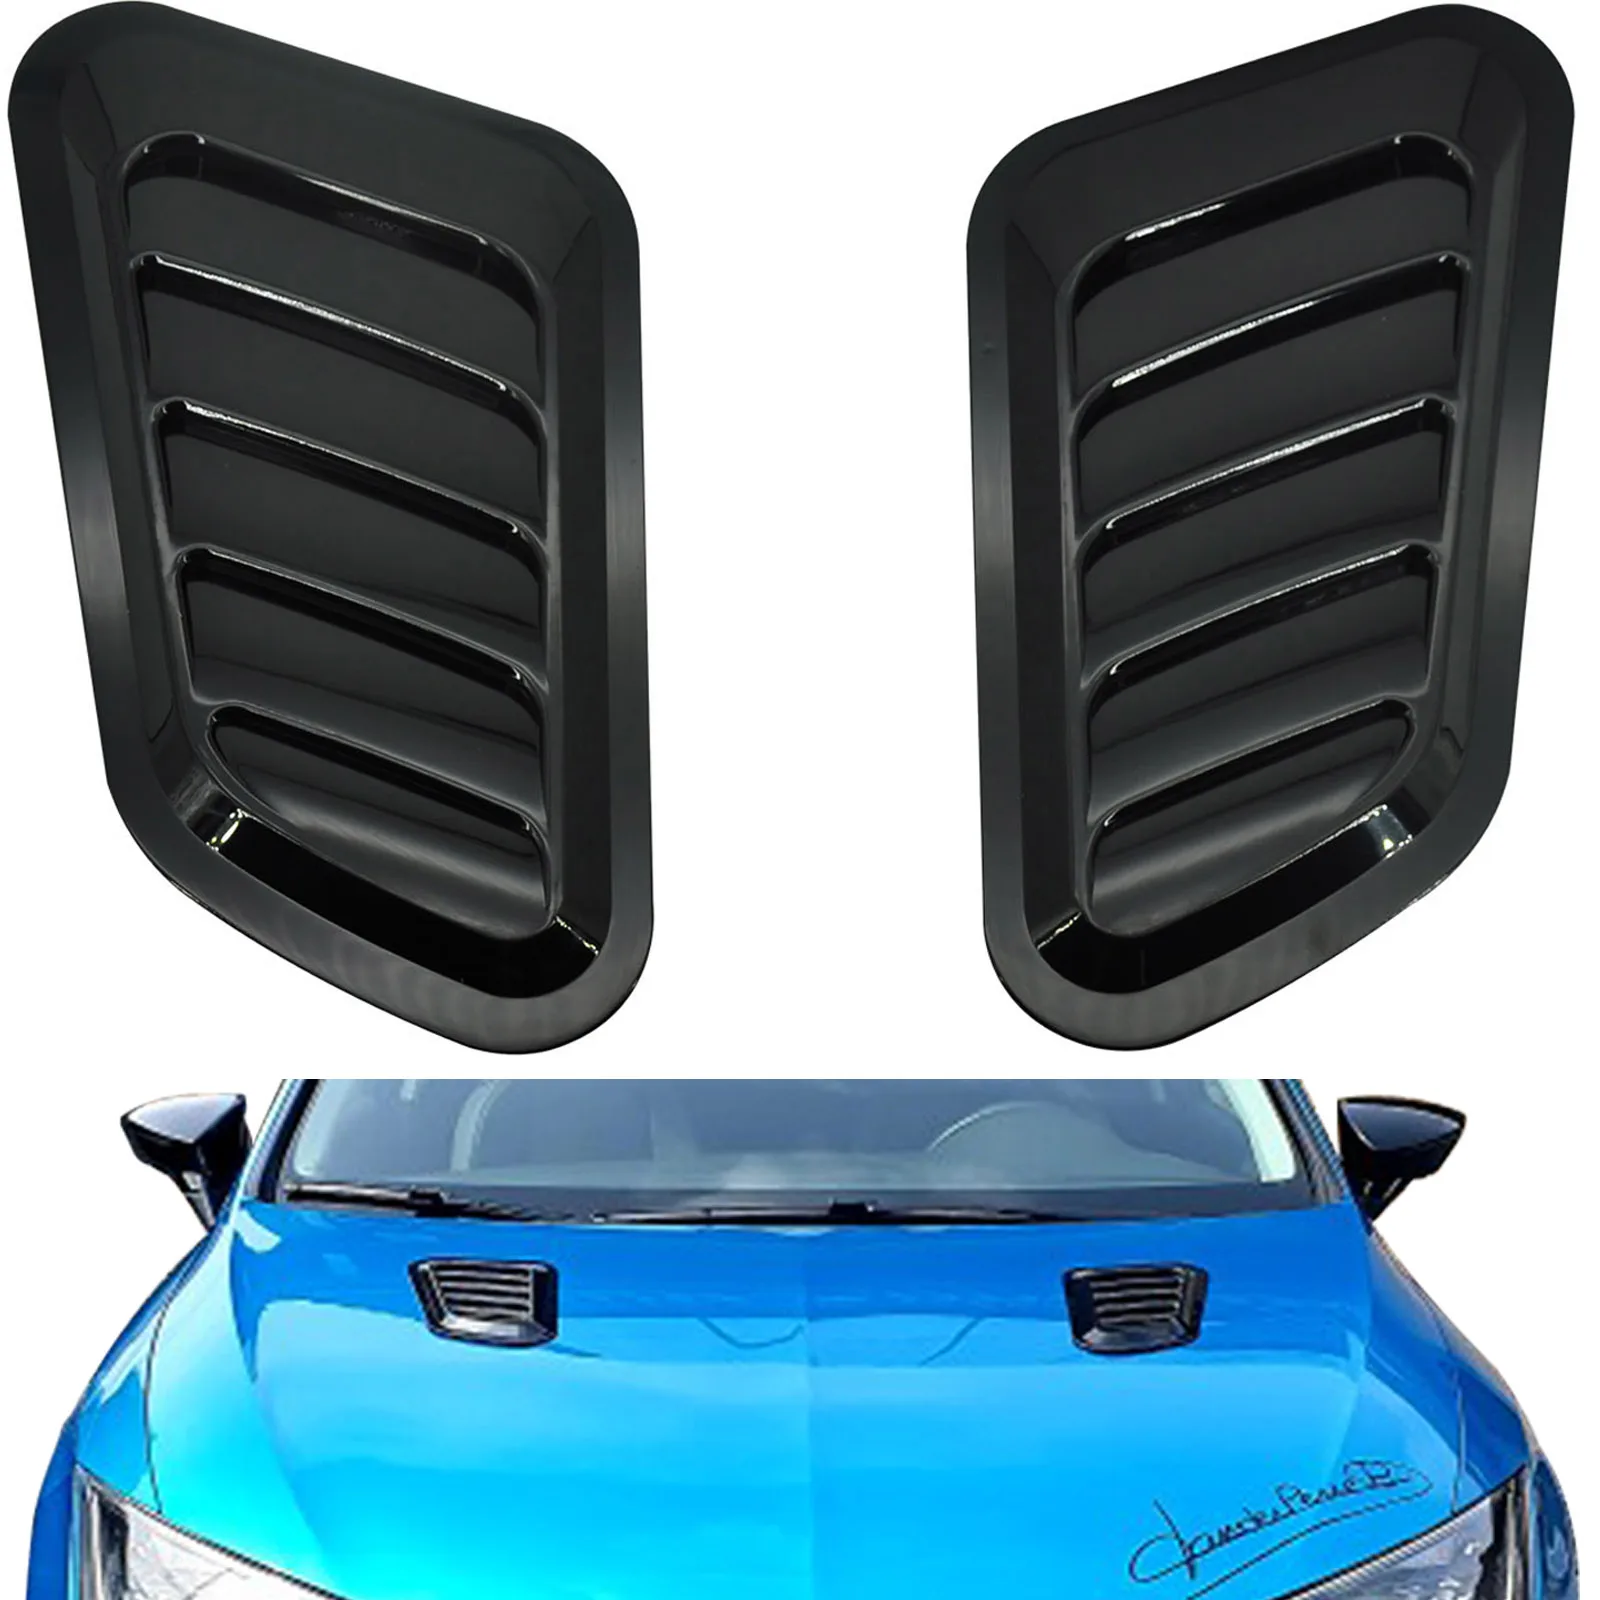 Black Universal 2x Car Vents Decorative Air Flow Intake Hood Scoops DIY Style with Double-Sided Adhesive Tape Air Flow Vent Hood 